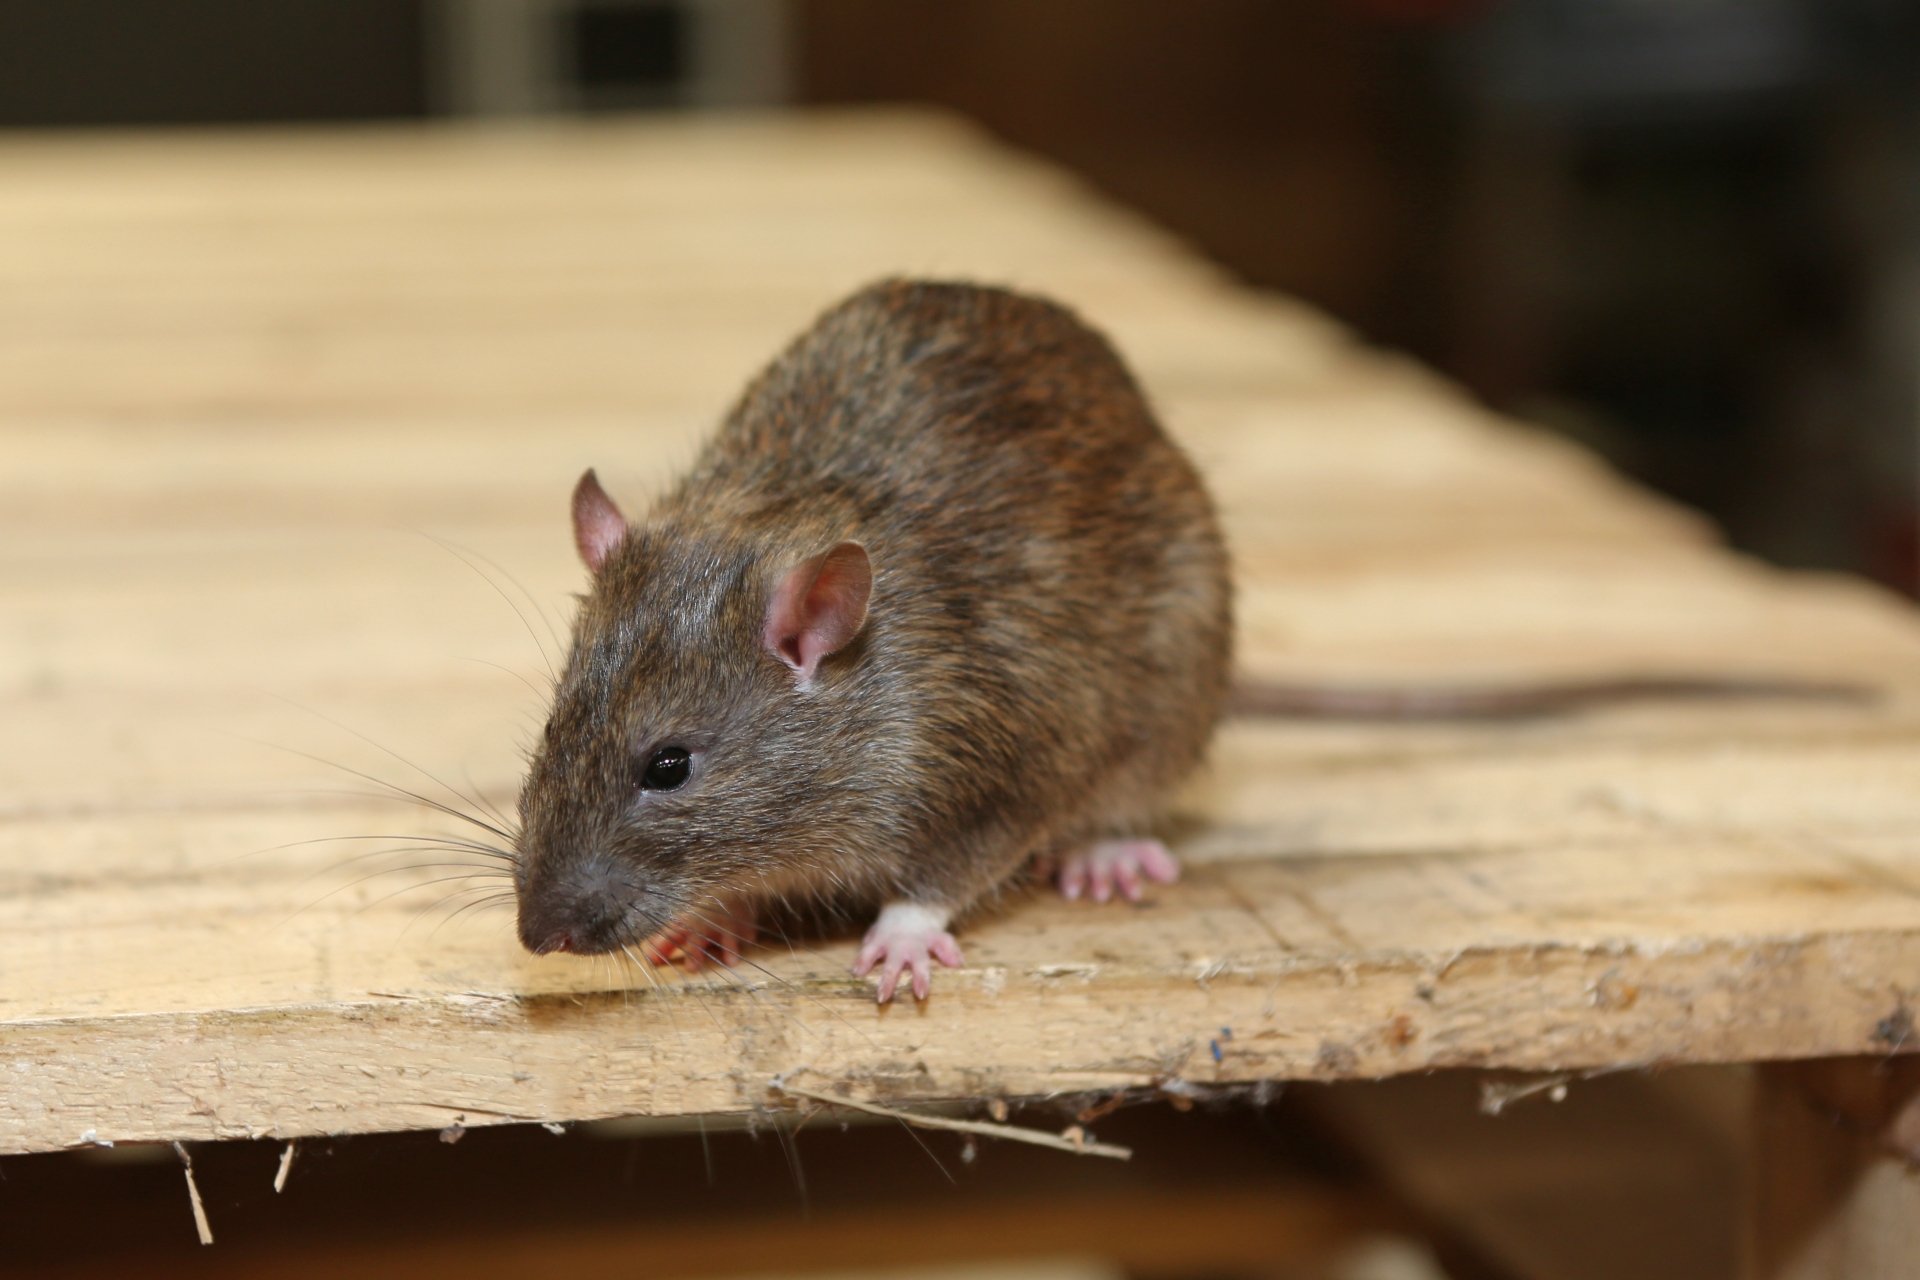 Rat extermination, Pest Control in Canbury, Coombe, KT2. Call Now 020 8166 9746